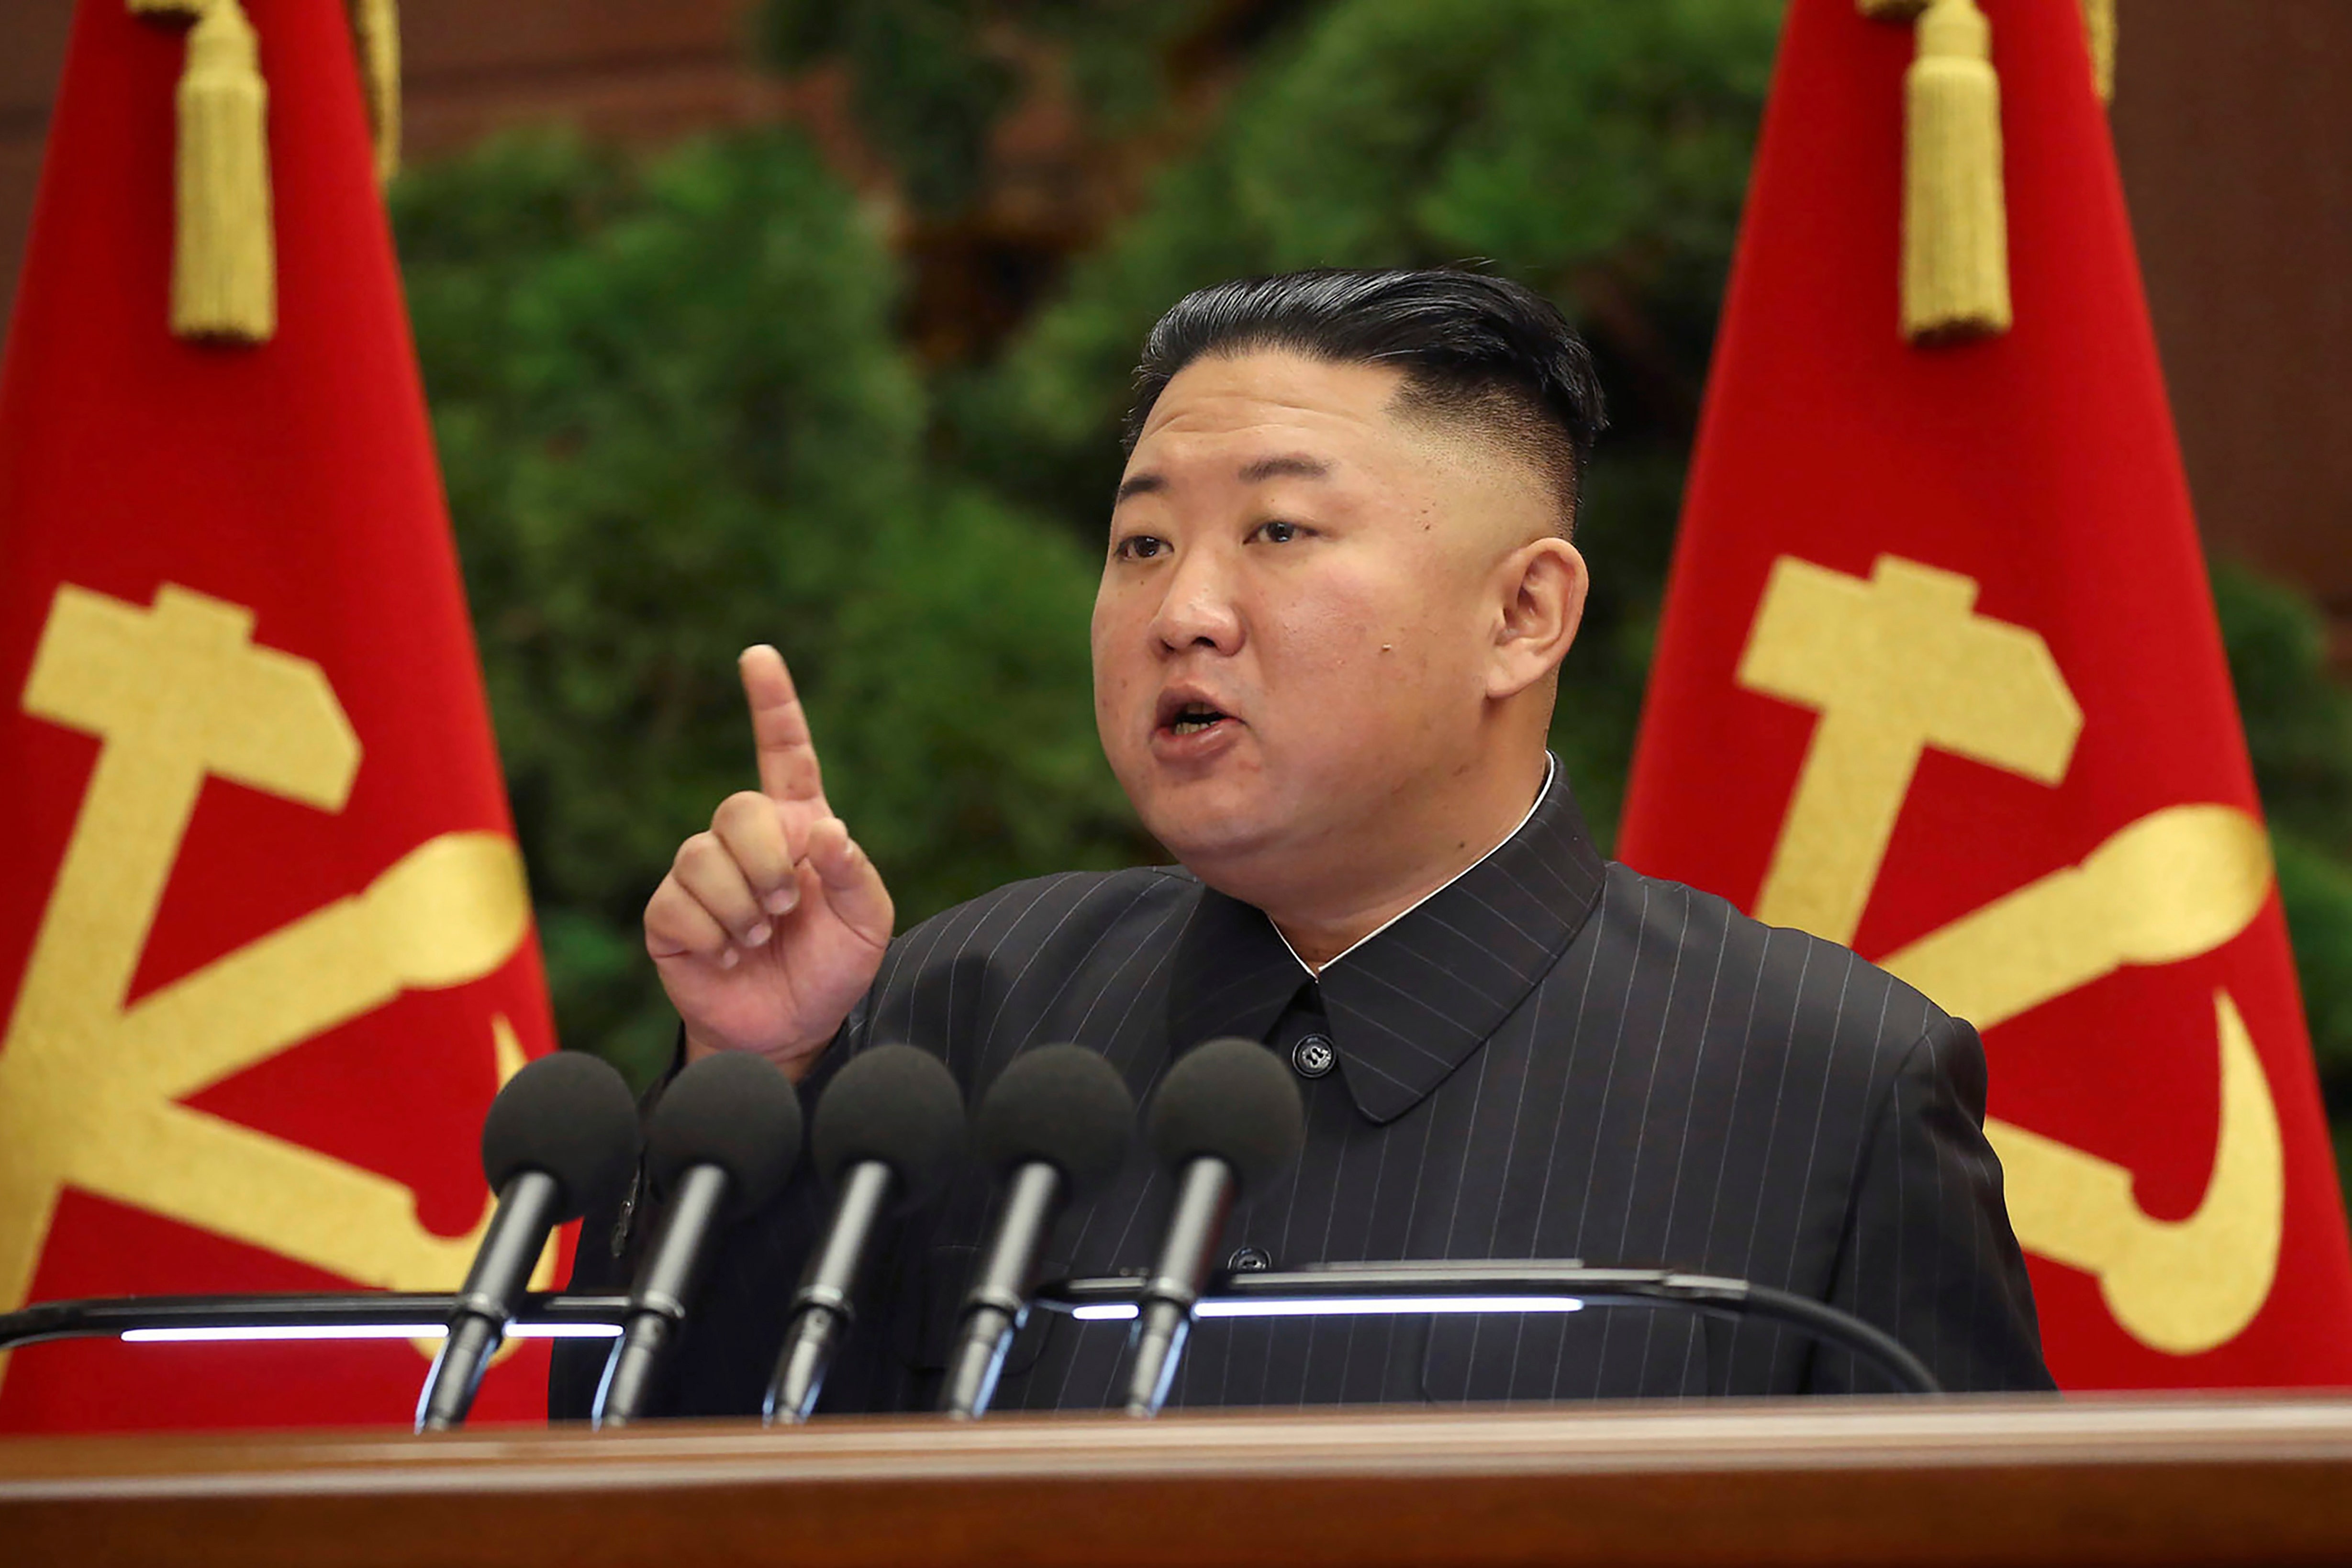 North Korea asks starving citizens to eat less as food shortages expected to continue: reports